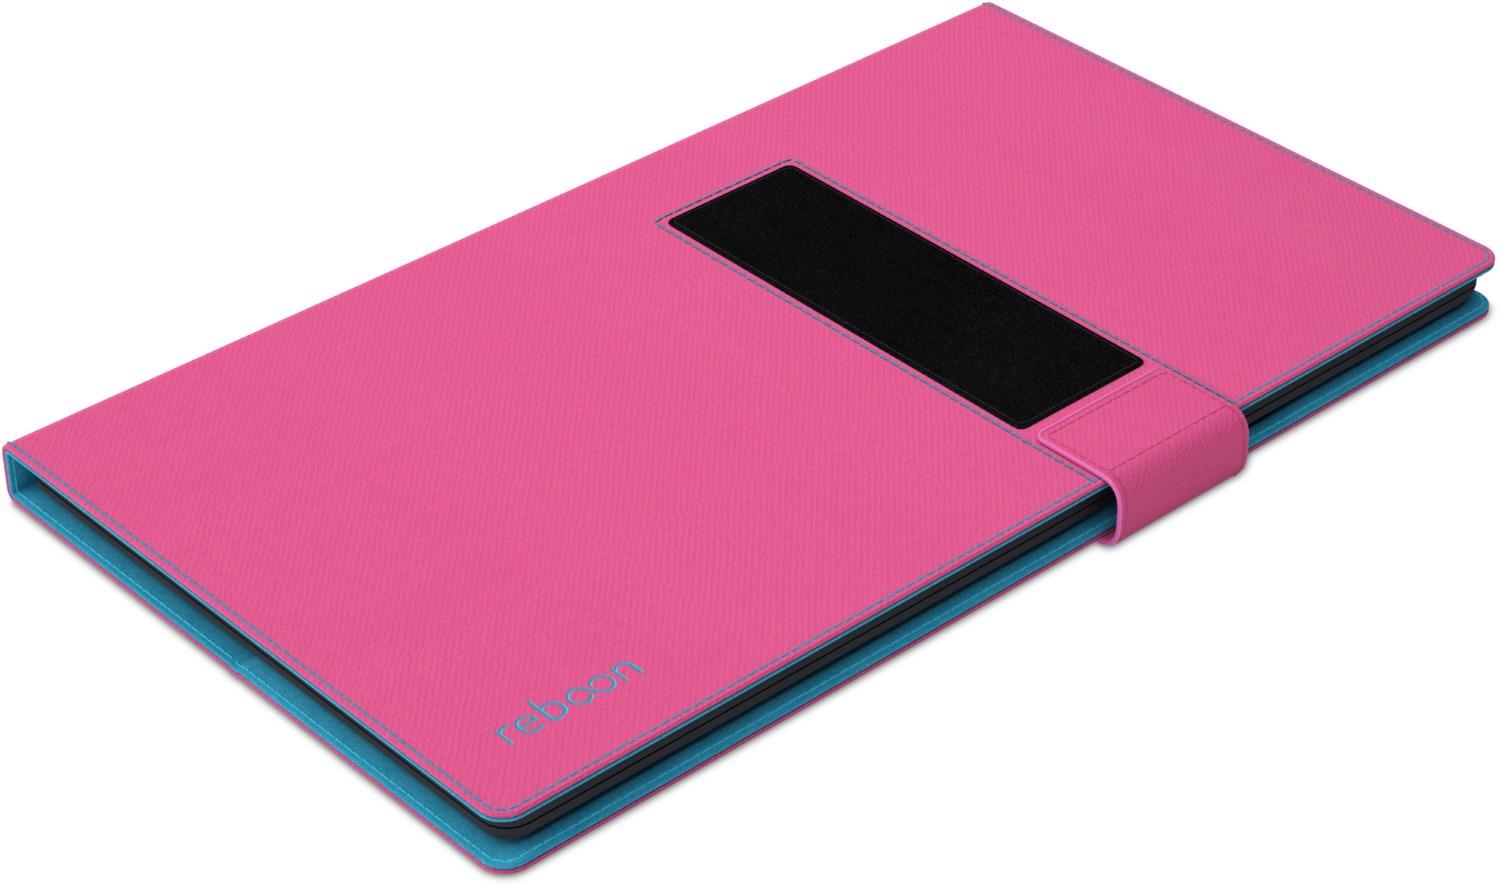 booncover L2 Tablethülle pink von reboon